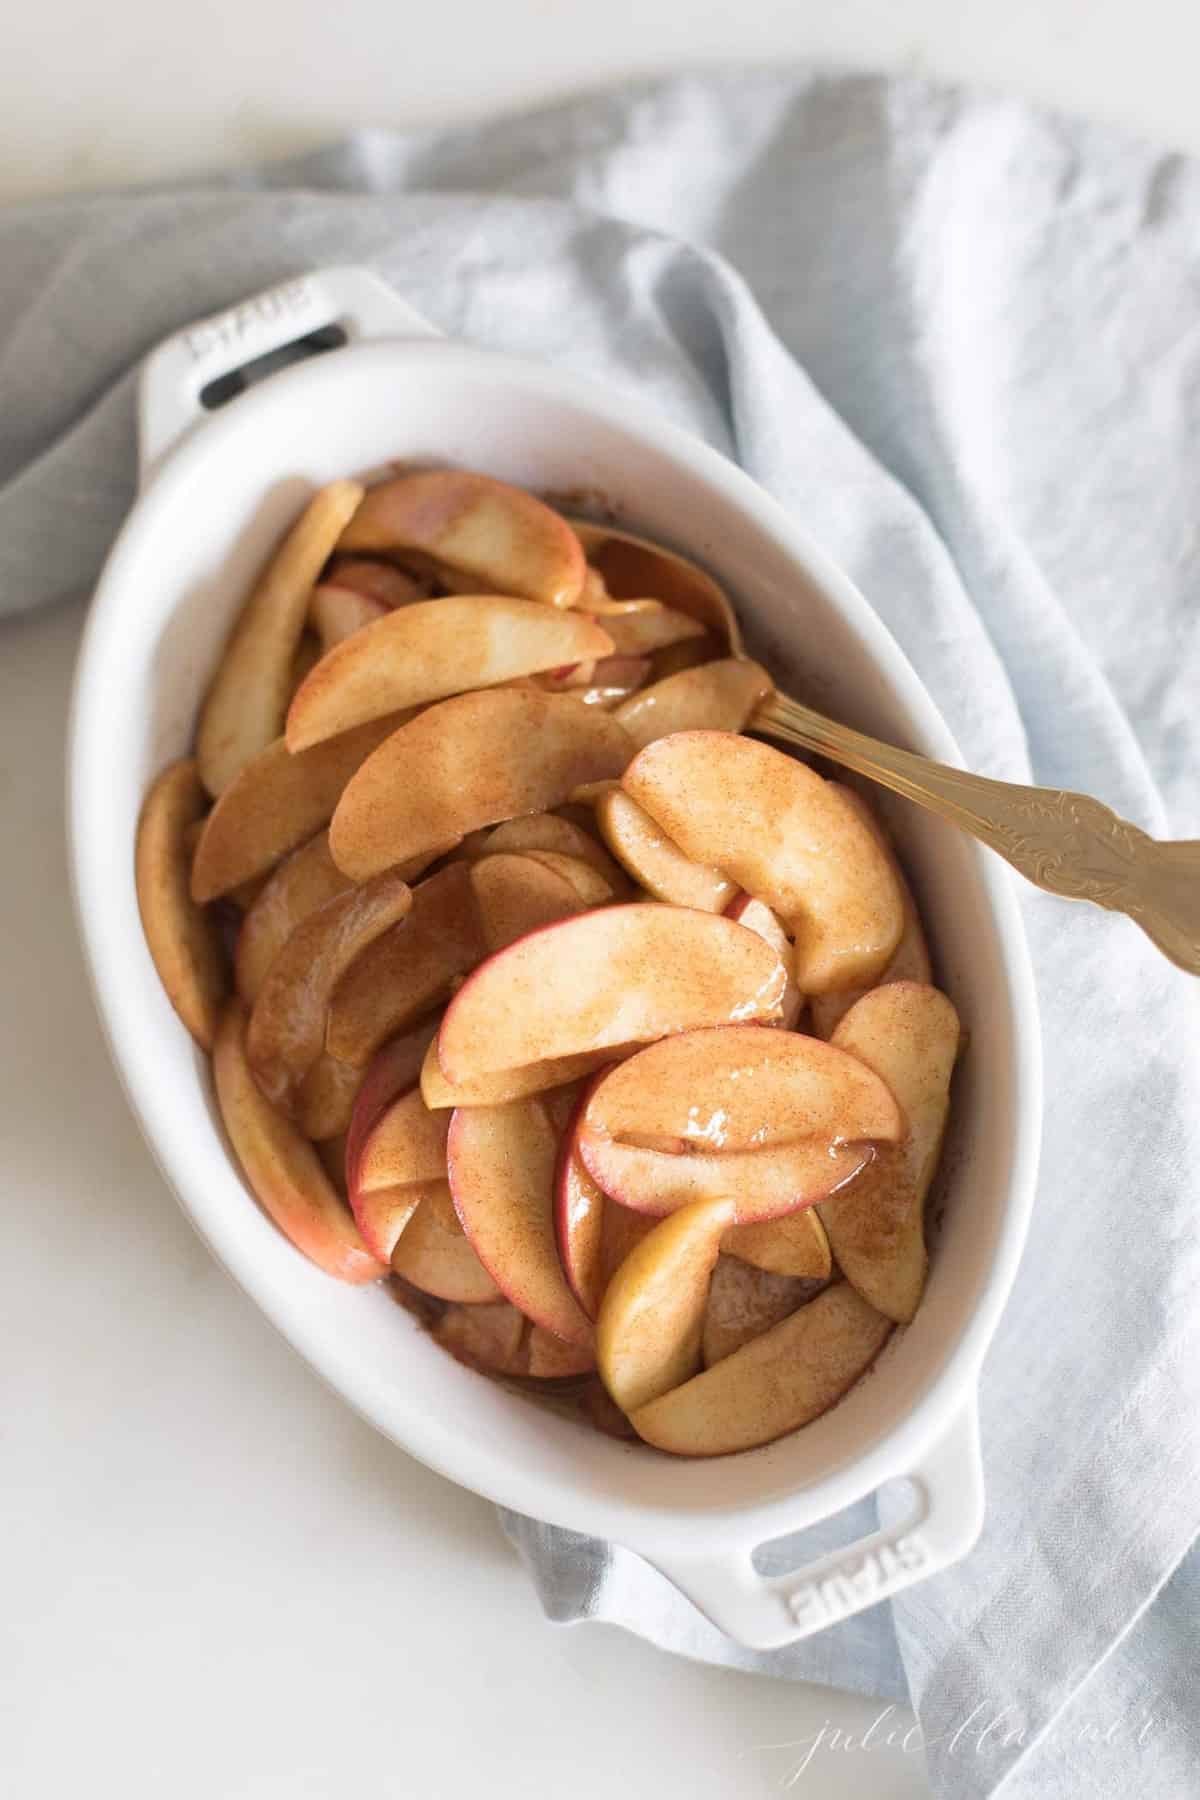 An oval baking dish with sliced baked apples.